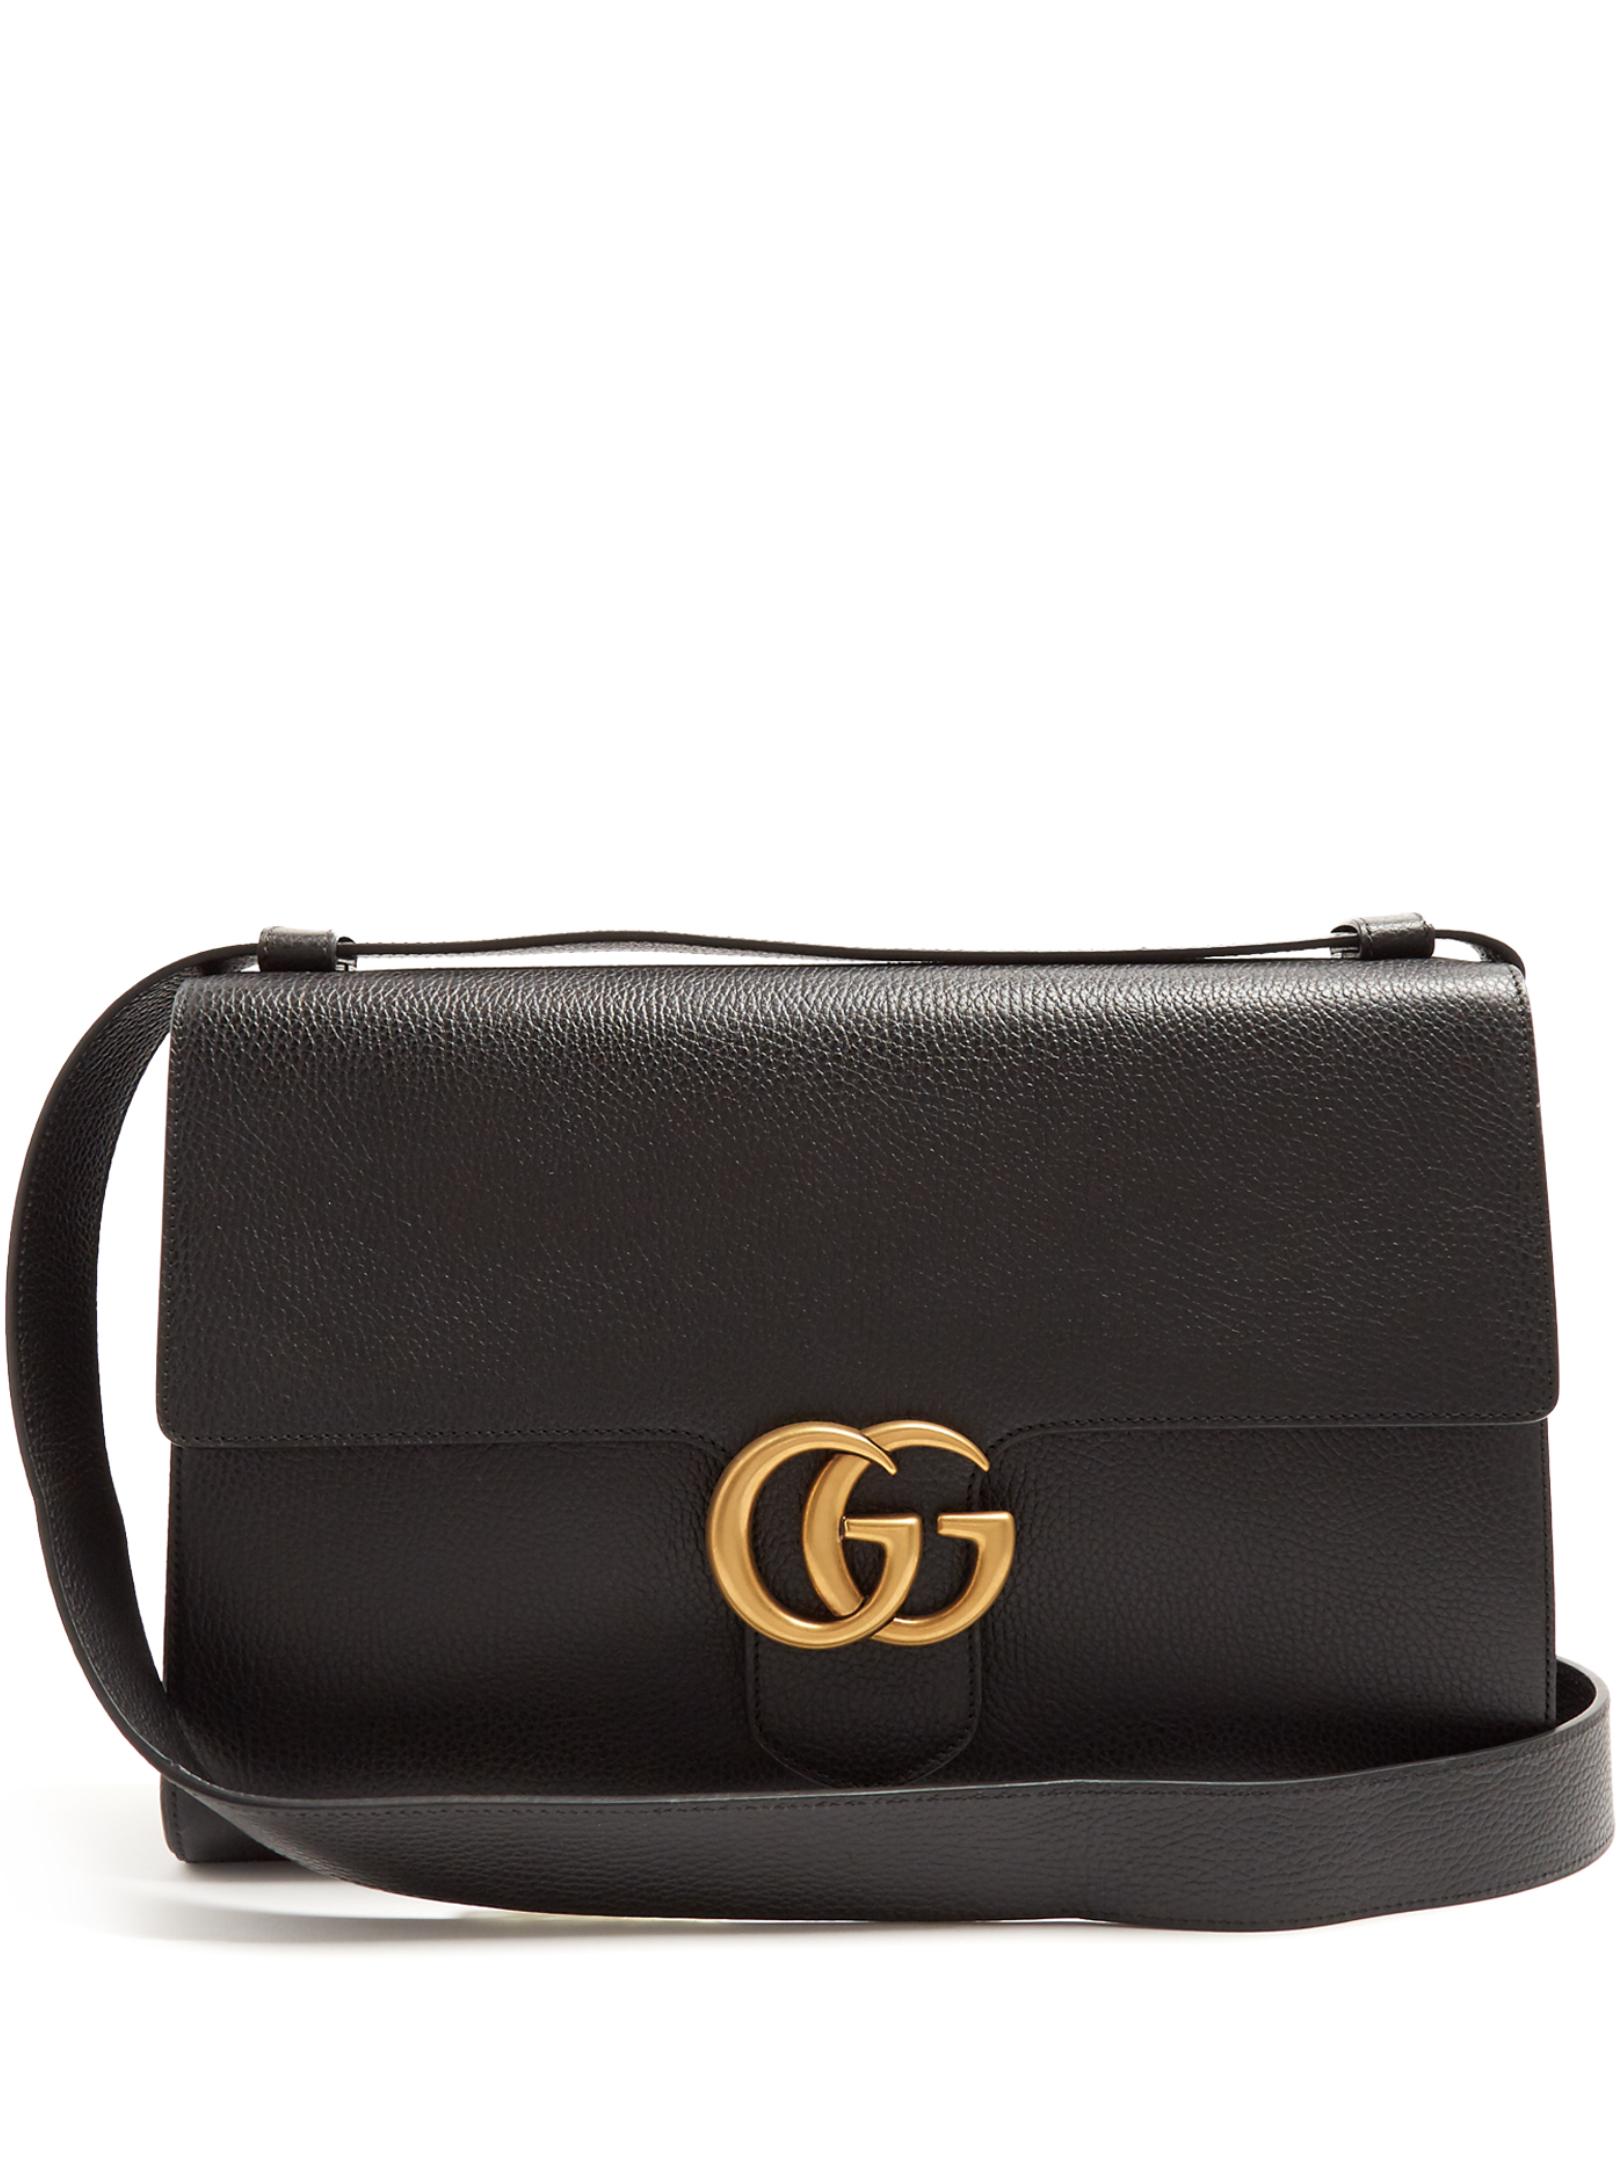 Gucci Gg Marmont Grained-leather Messenger Bag in Black for Men | Lyst